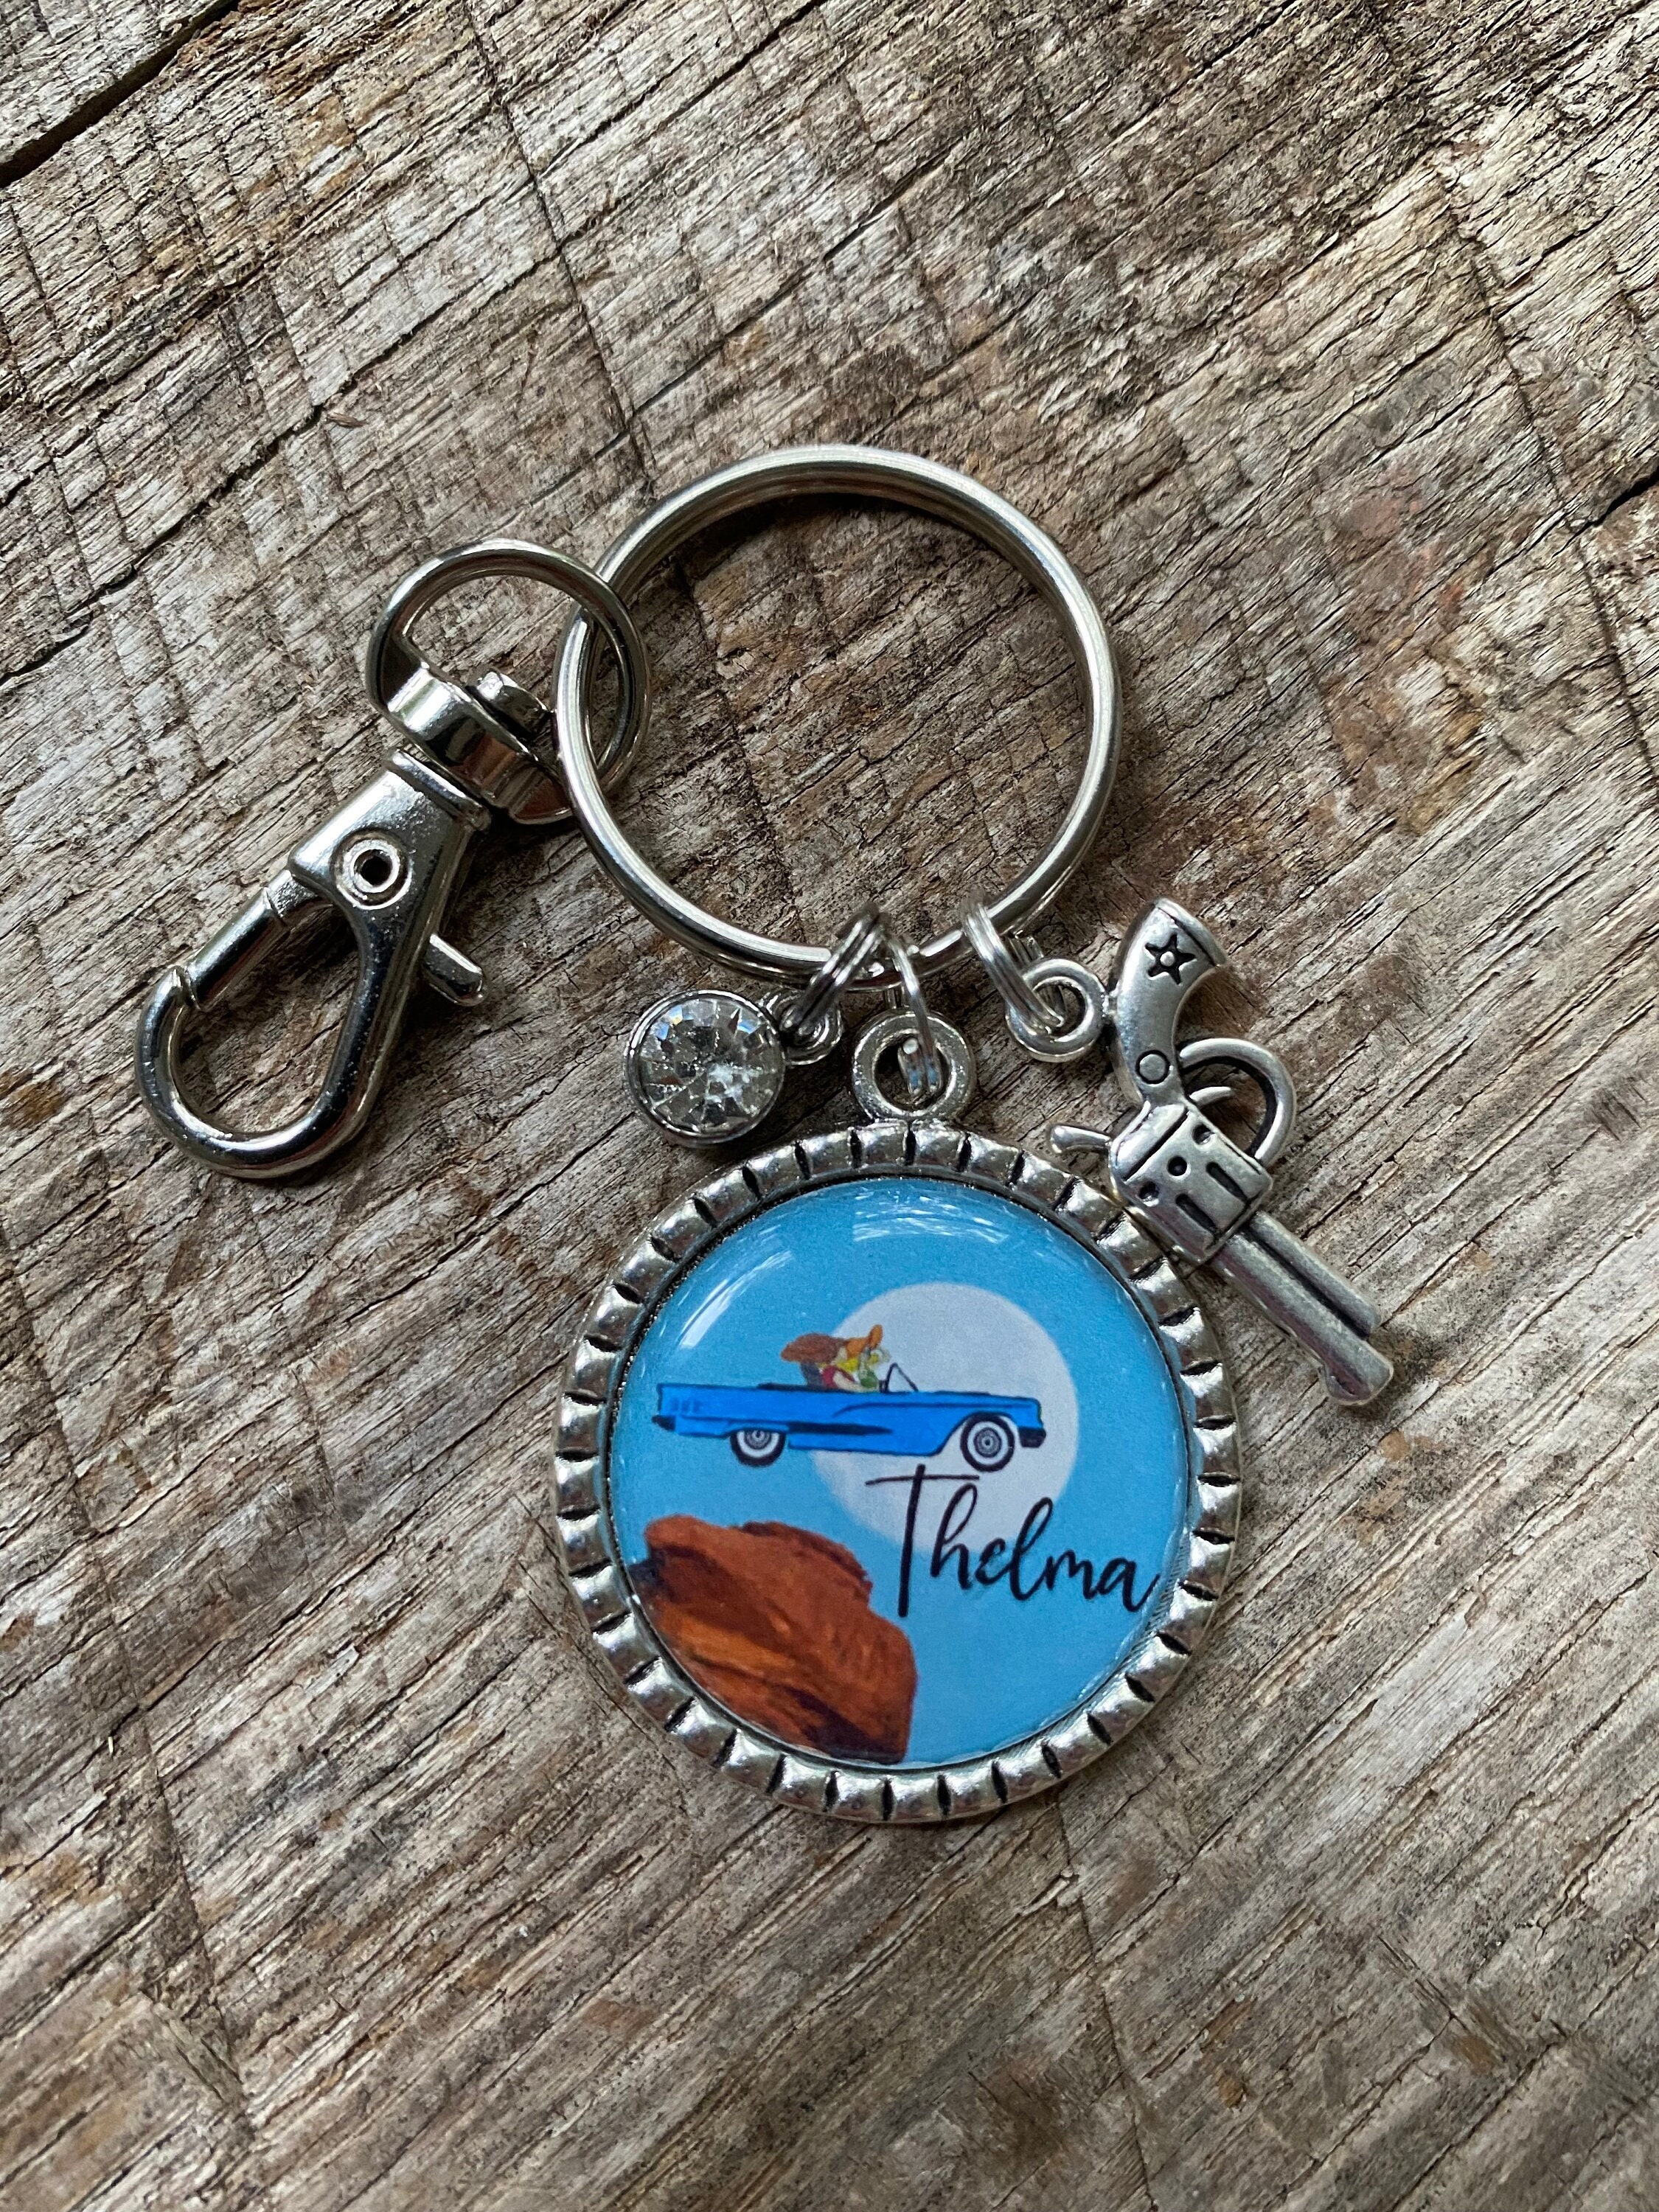 Personalized Thelma and Louise Partners in Crime Inspired Silver Charm  Keychain Set Custom Gift